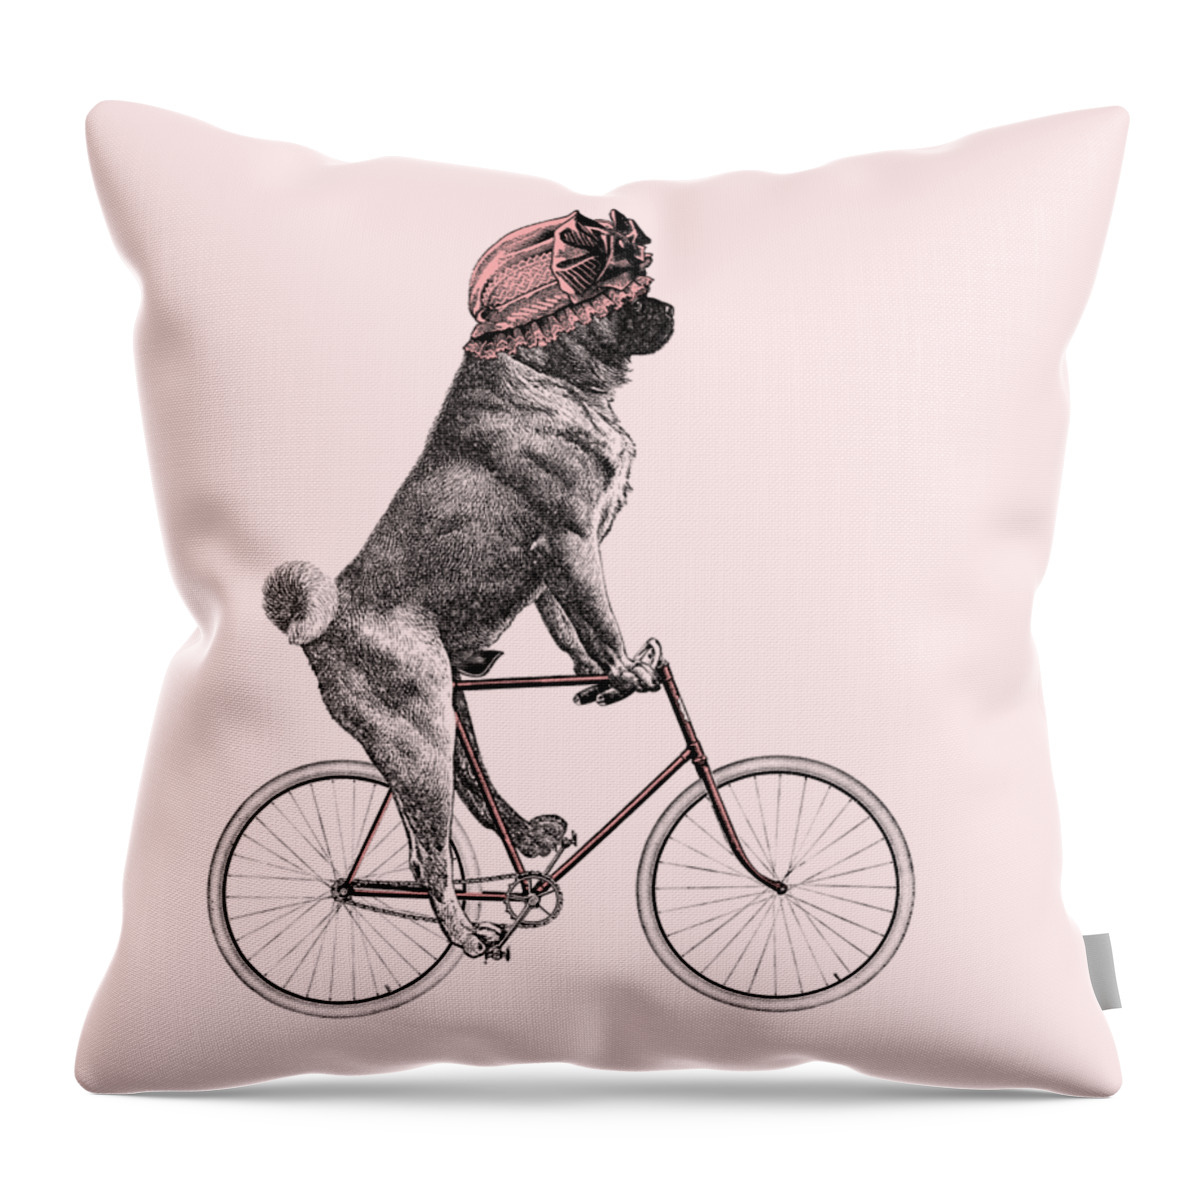 Pug Throw Pillow featuring the digital art Bike Pug With Bonnet by Madame Memento